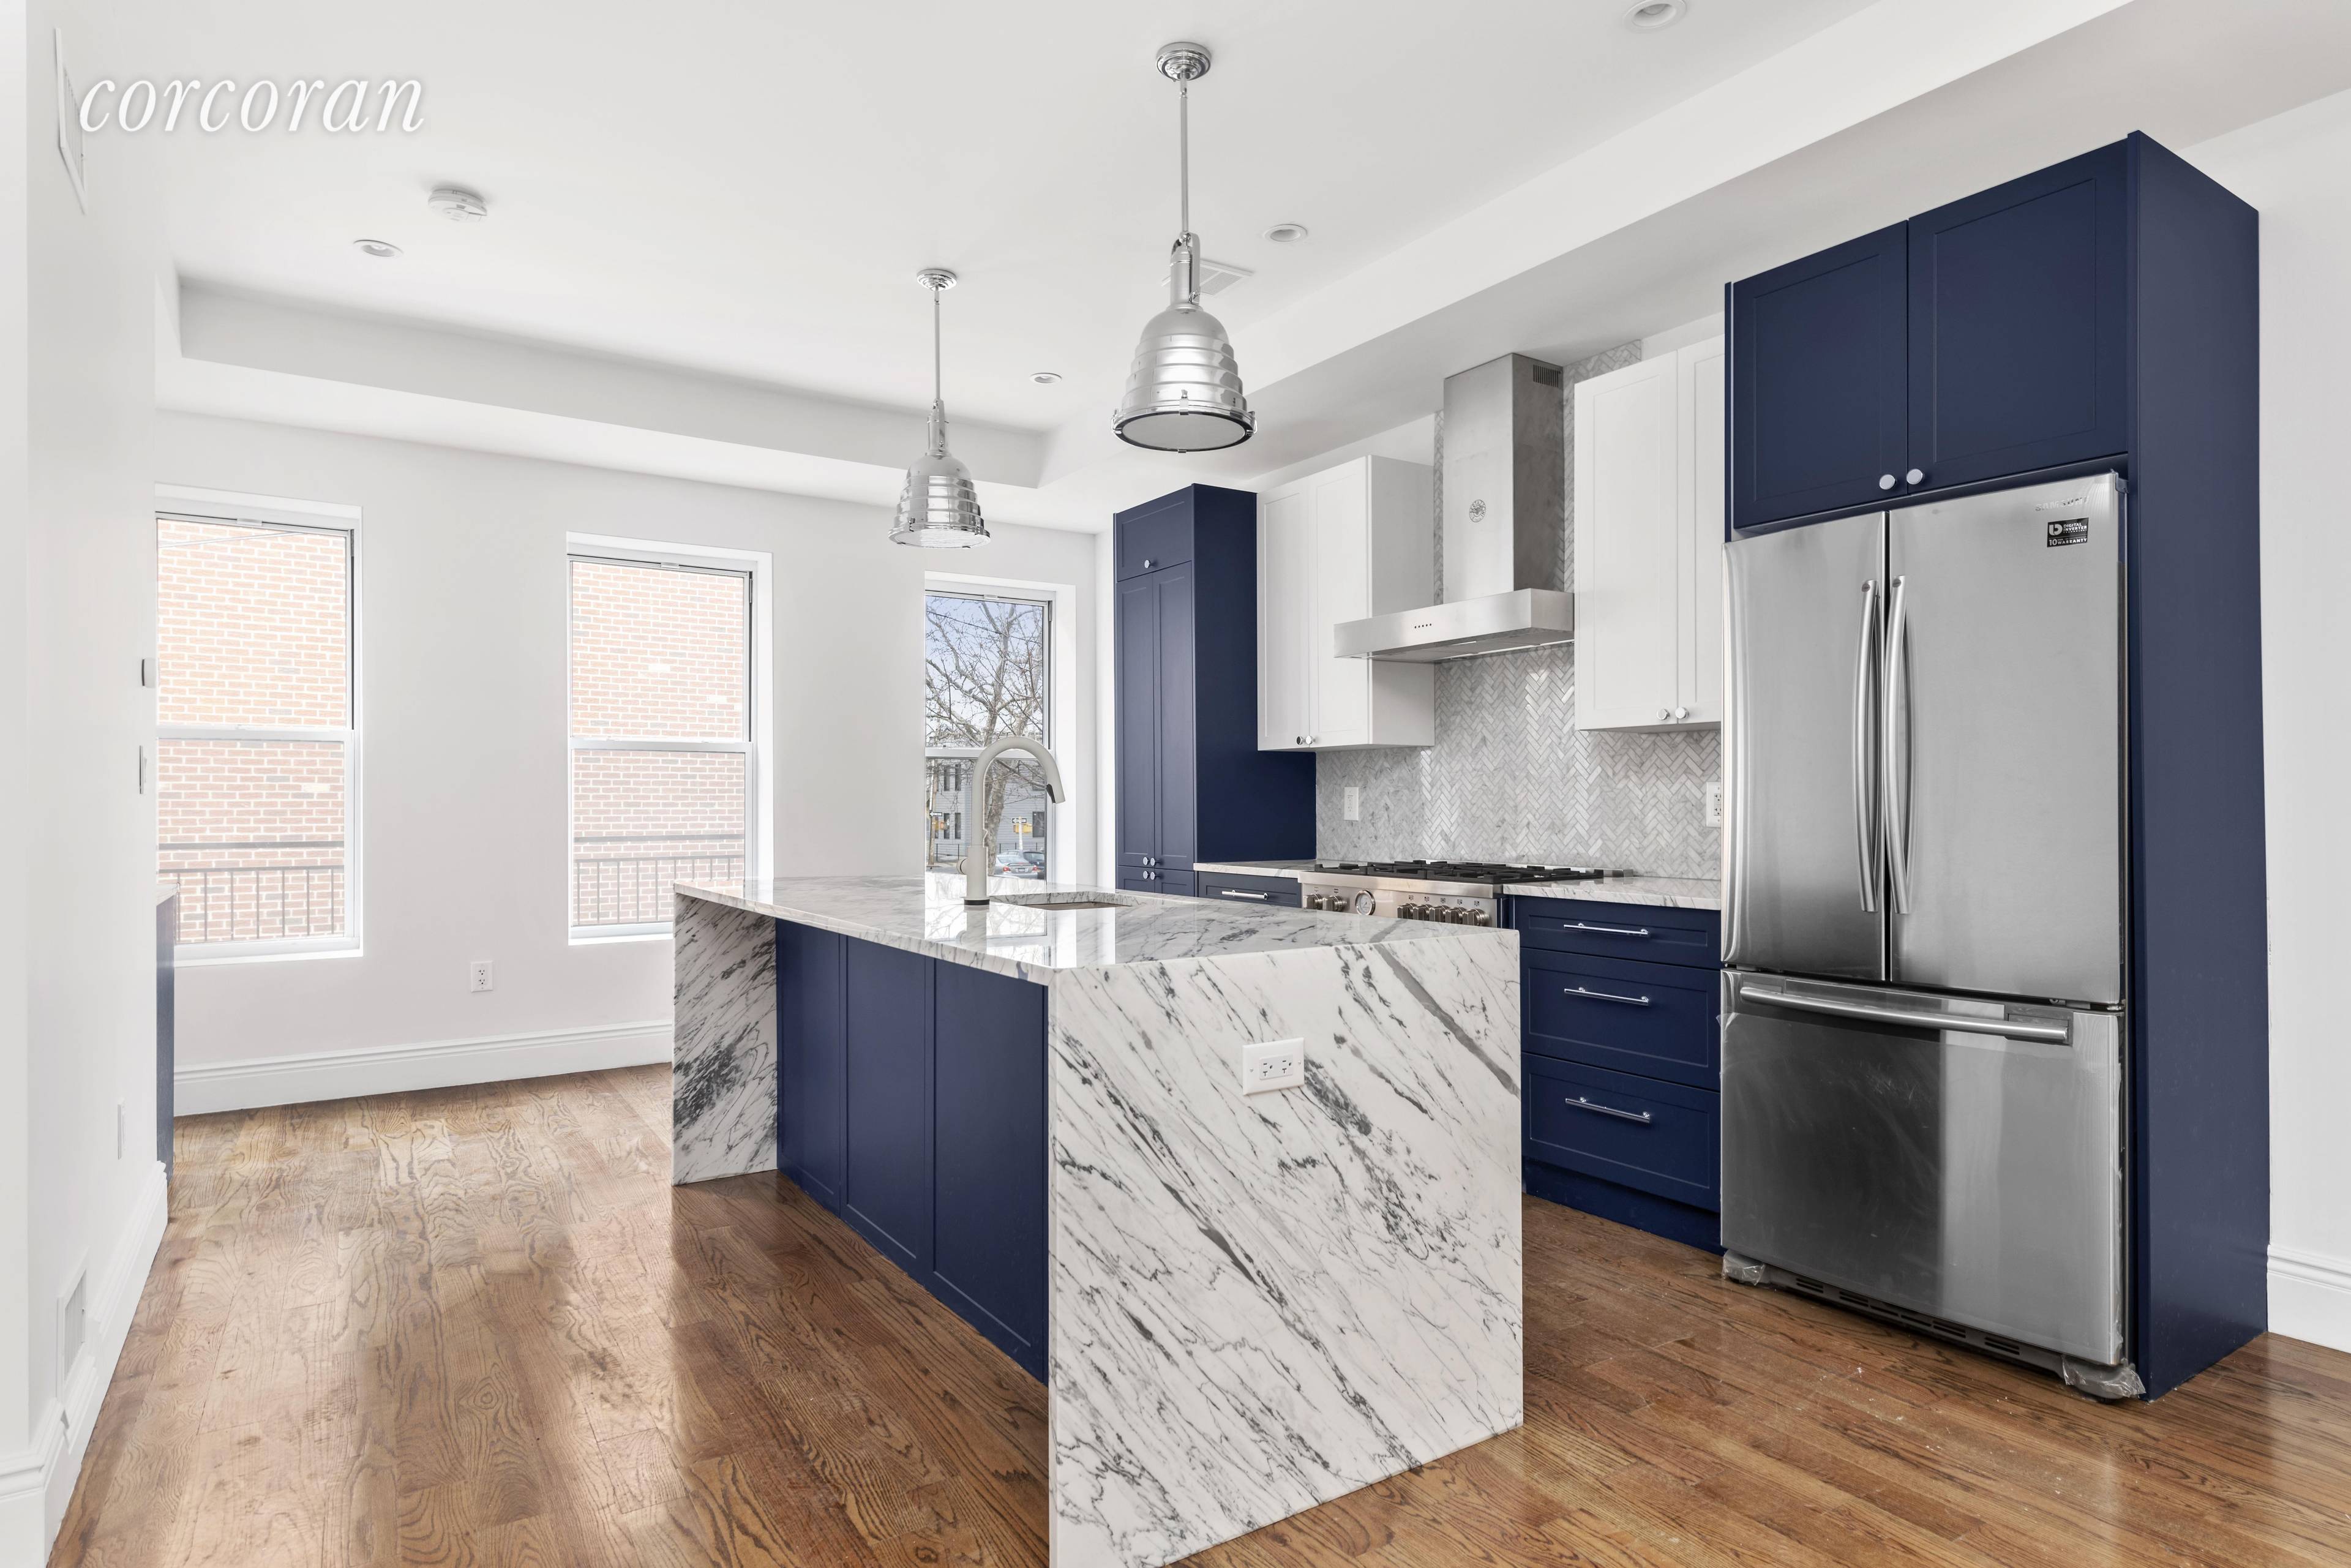 No expense was spared in renovating 385 Hawthorne Street, a mint condition single family in prime Prospect Lefferts Gardens with the added convenience of private parking.